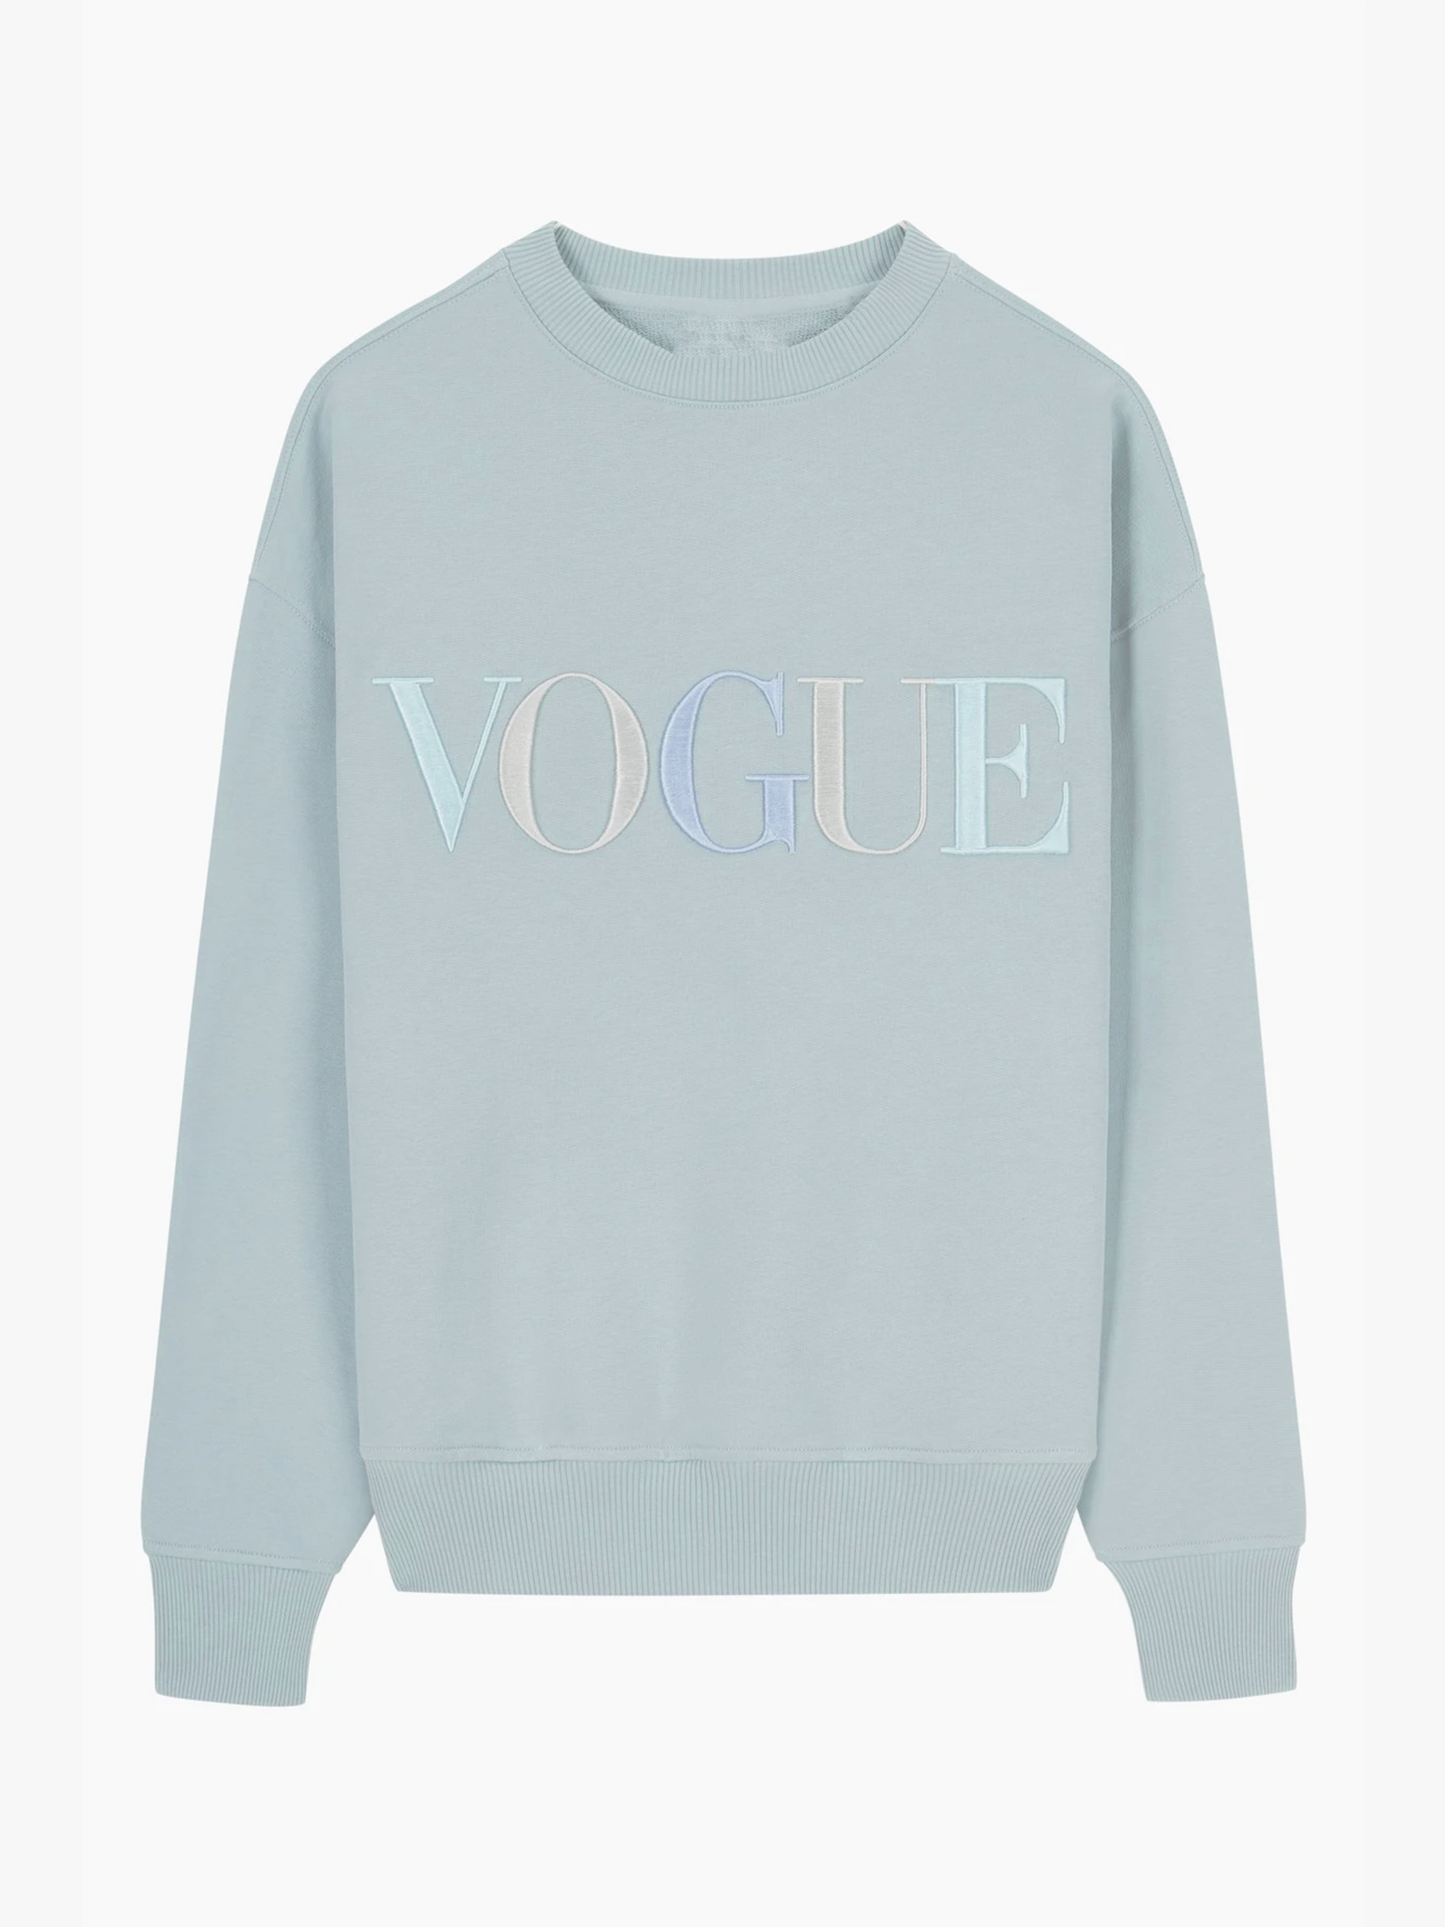 In Style Pastel Rainbow Embroidered Sweatshirt - Out The Purse UK